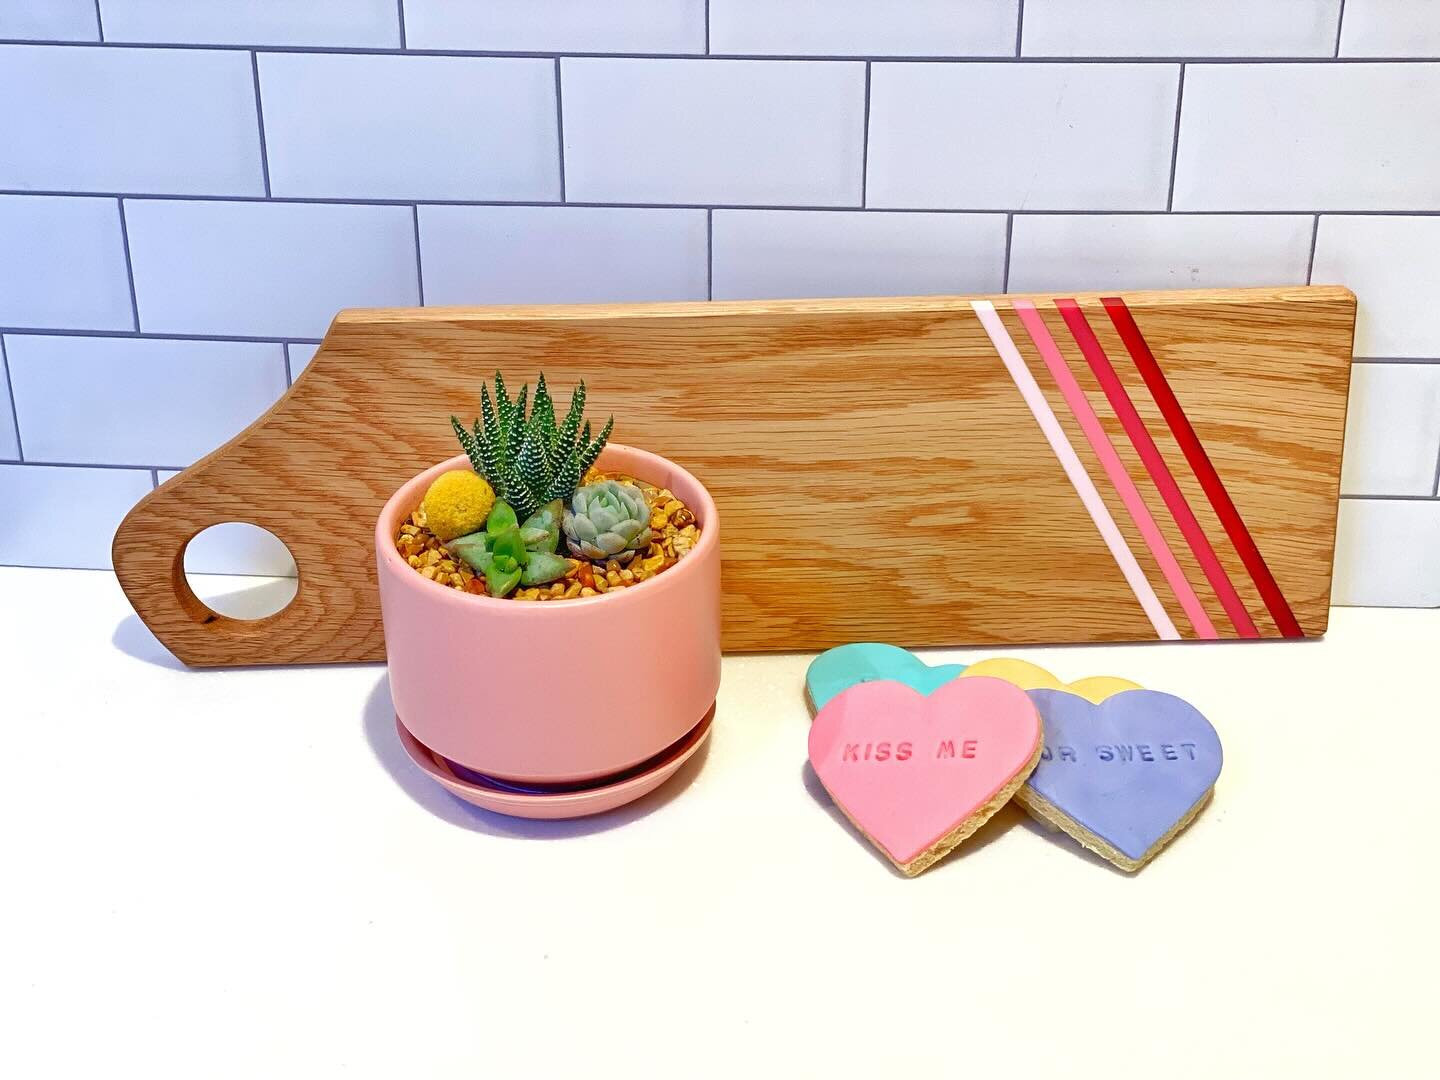 Whether you&rsquo;re celebrating Valentines, Galentines or simply want to treat yourself to something beautiful, The Little Shop Valentines Day store is full of local, handmade items that will help you find that &ldquo;can&rsquo;t eat, can&rsquo;t sl